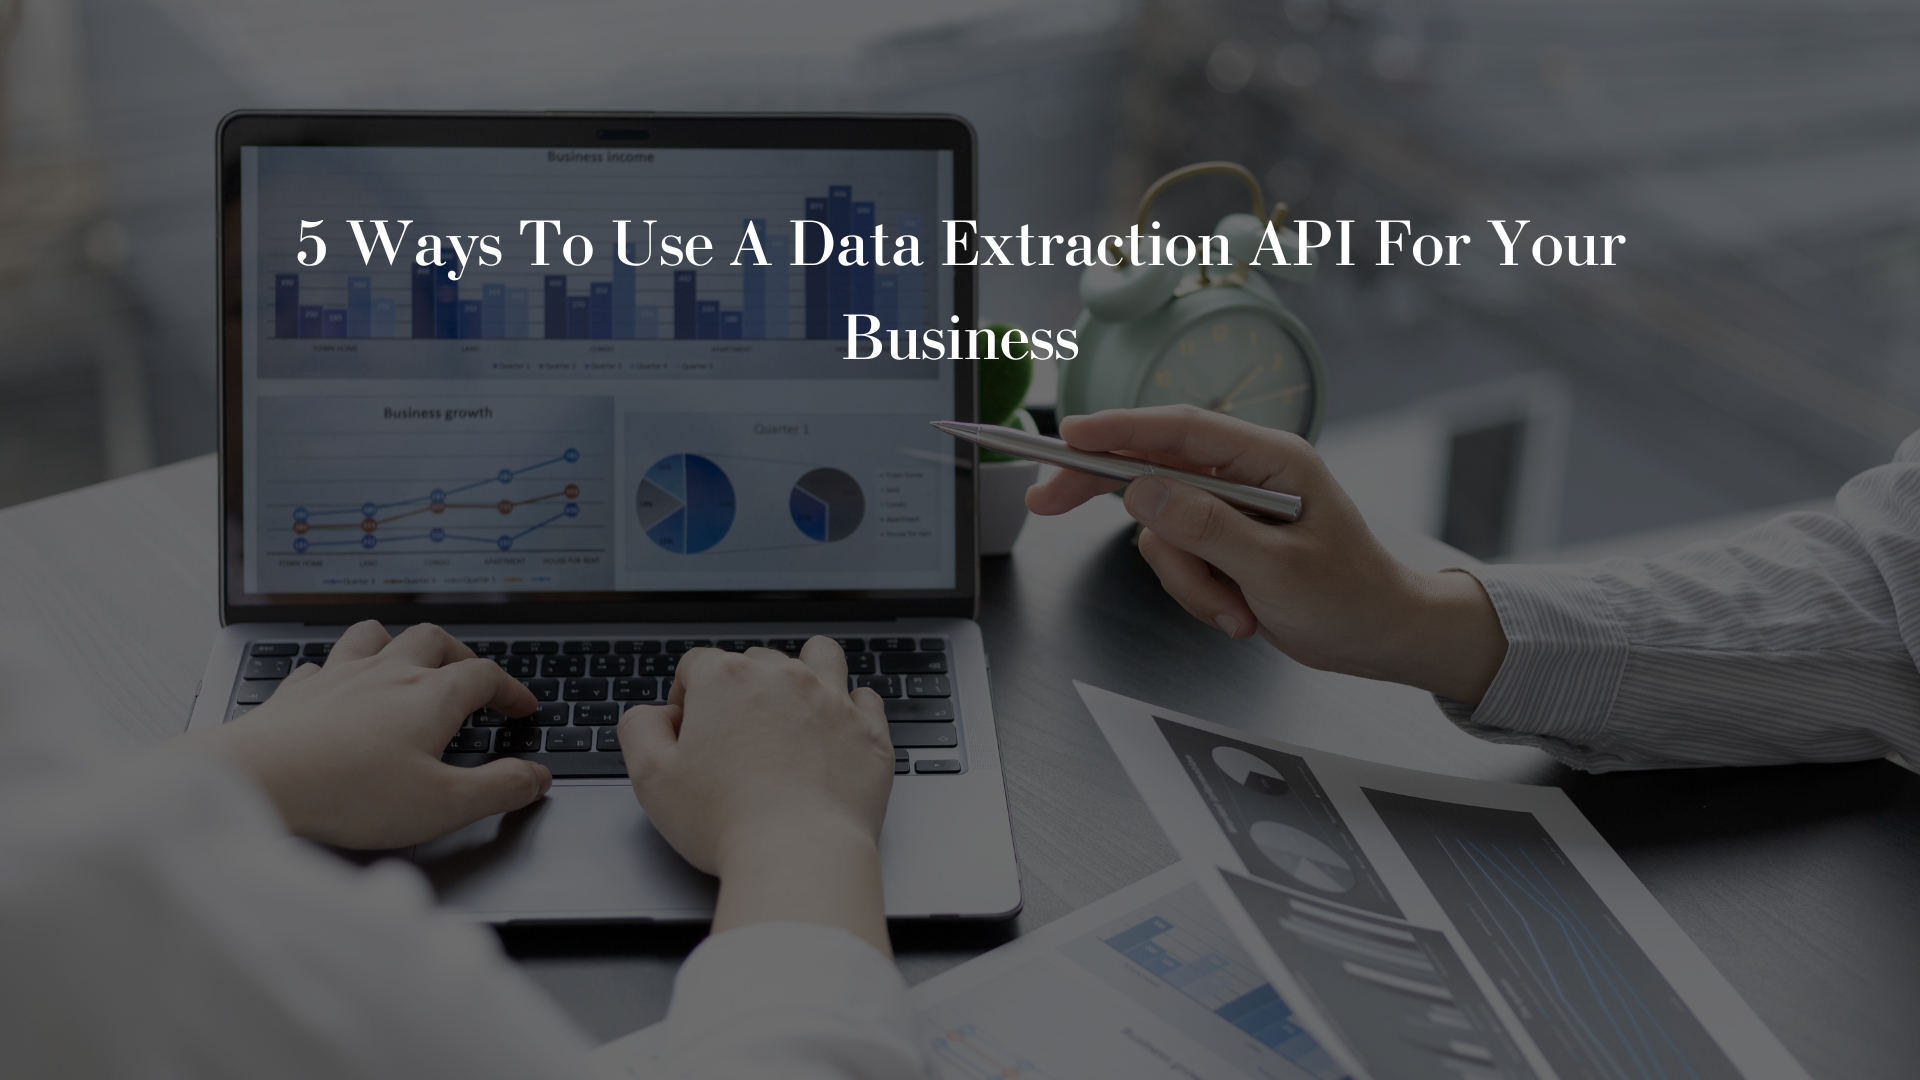 5 Ways To Use A Data Extraction API For Your Business